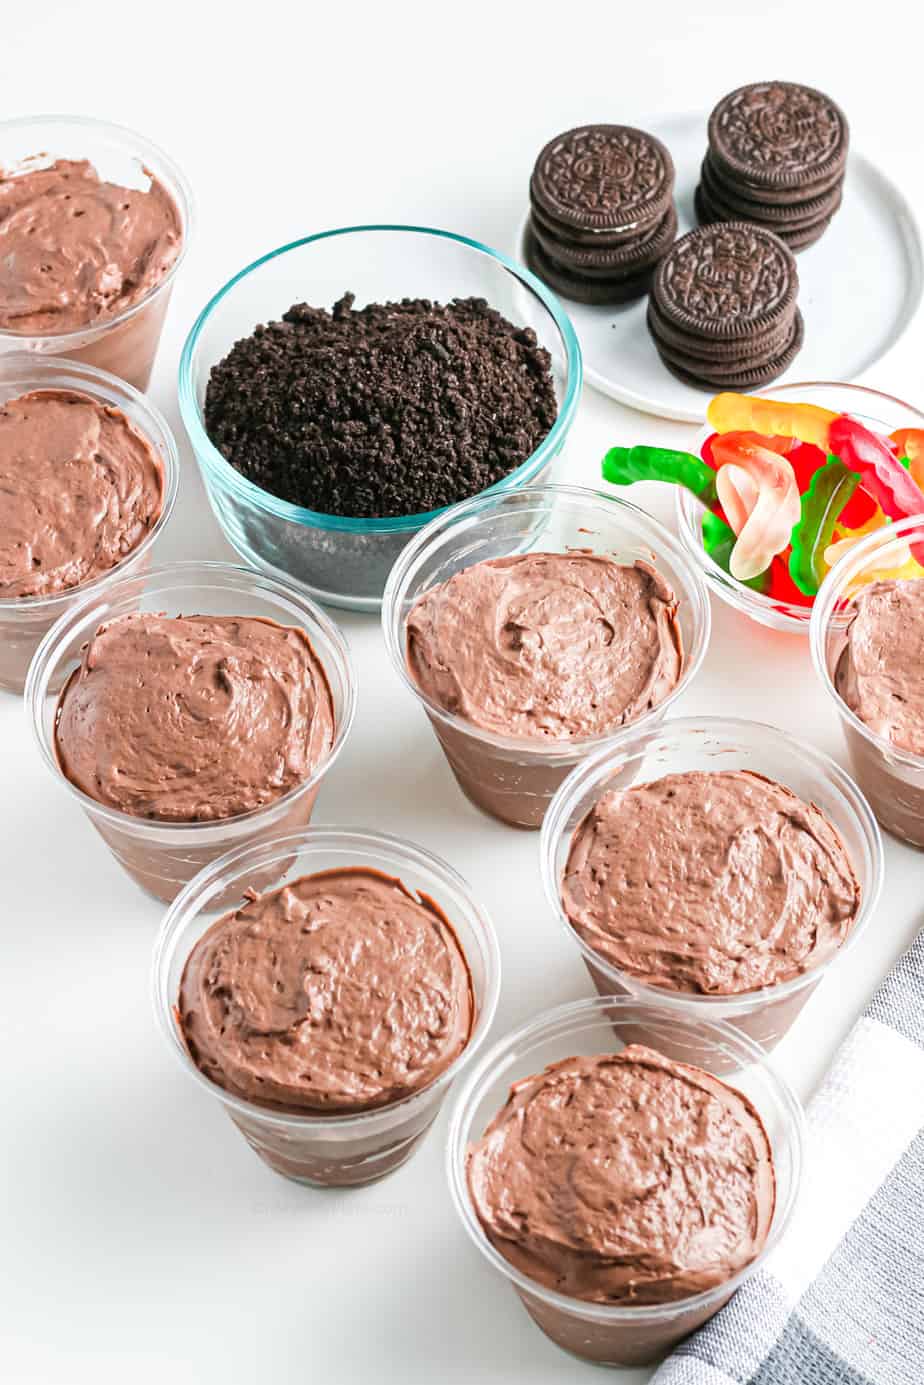 Chocolate pudding in individual cups with Oreo chocolate cookies and gummy worms in bowls